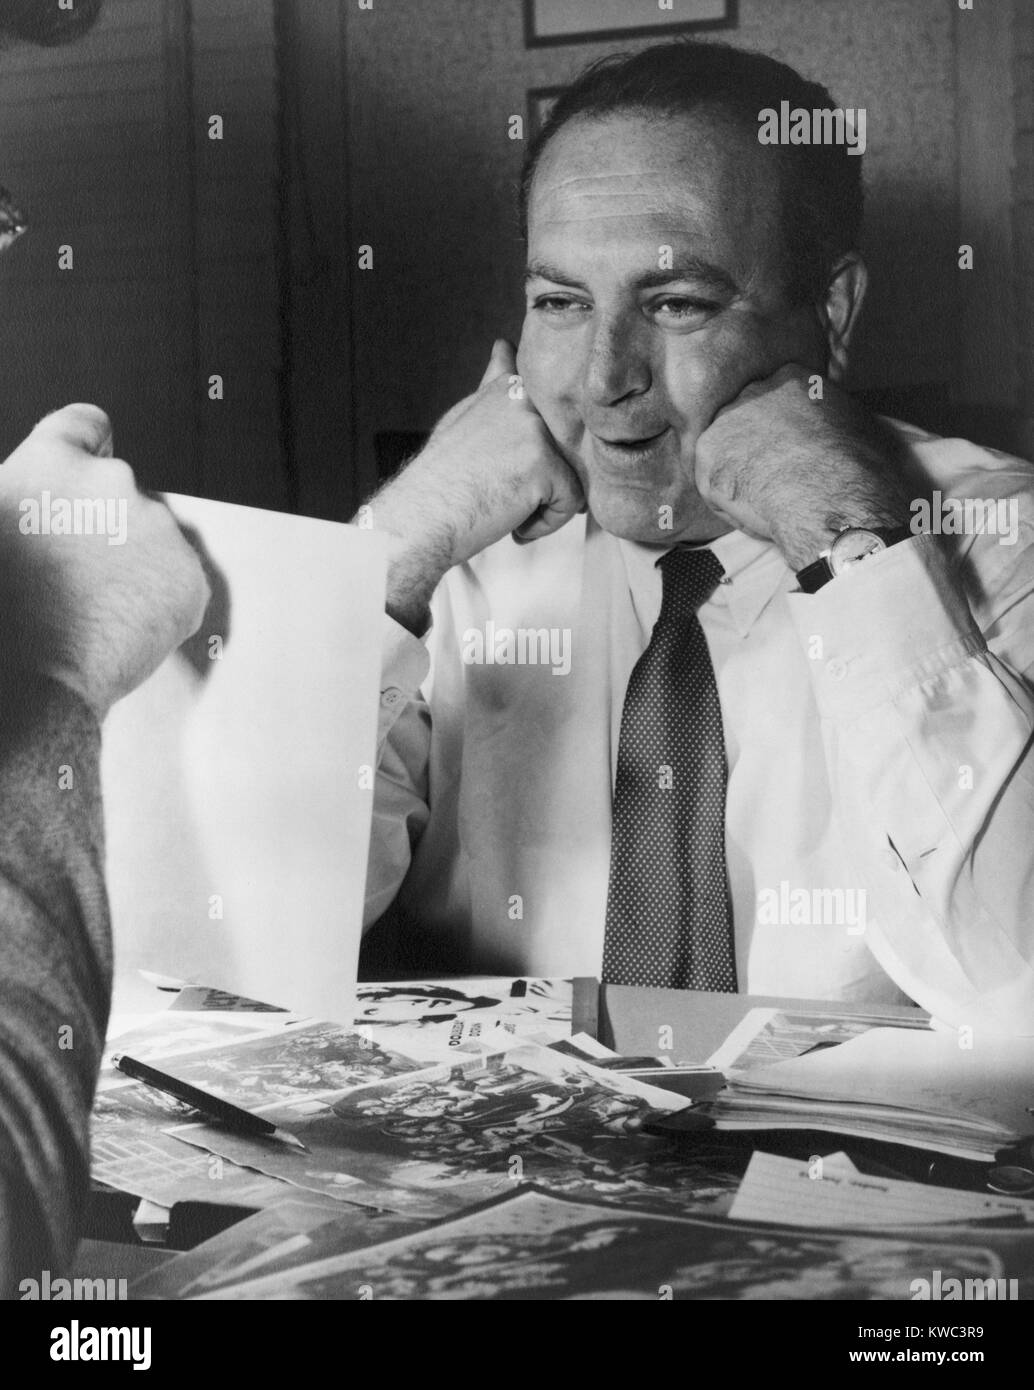 Film producer Val Lewton smiling as he looks at a photograph, in the 1940s. Photo from his personal papers. (BSLOC 2015 14 174) Stock Photo